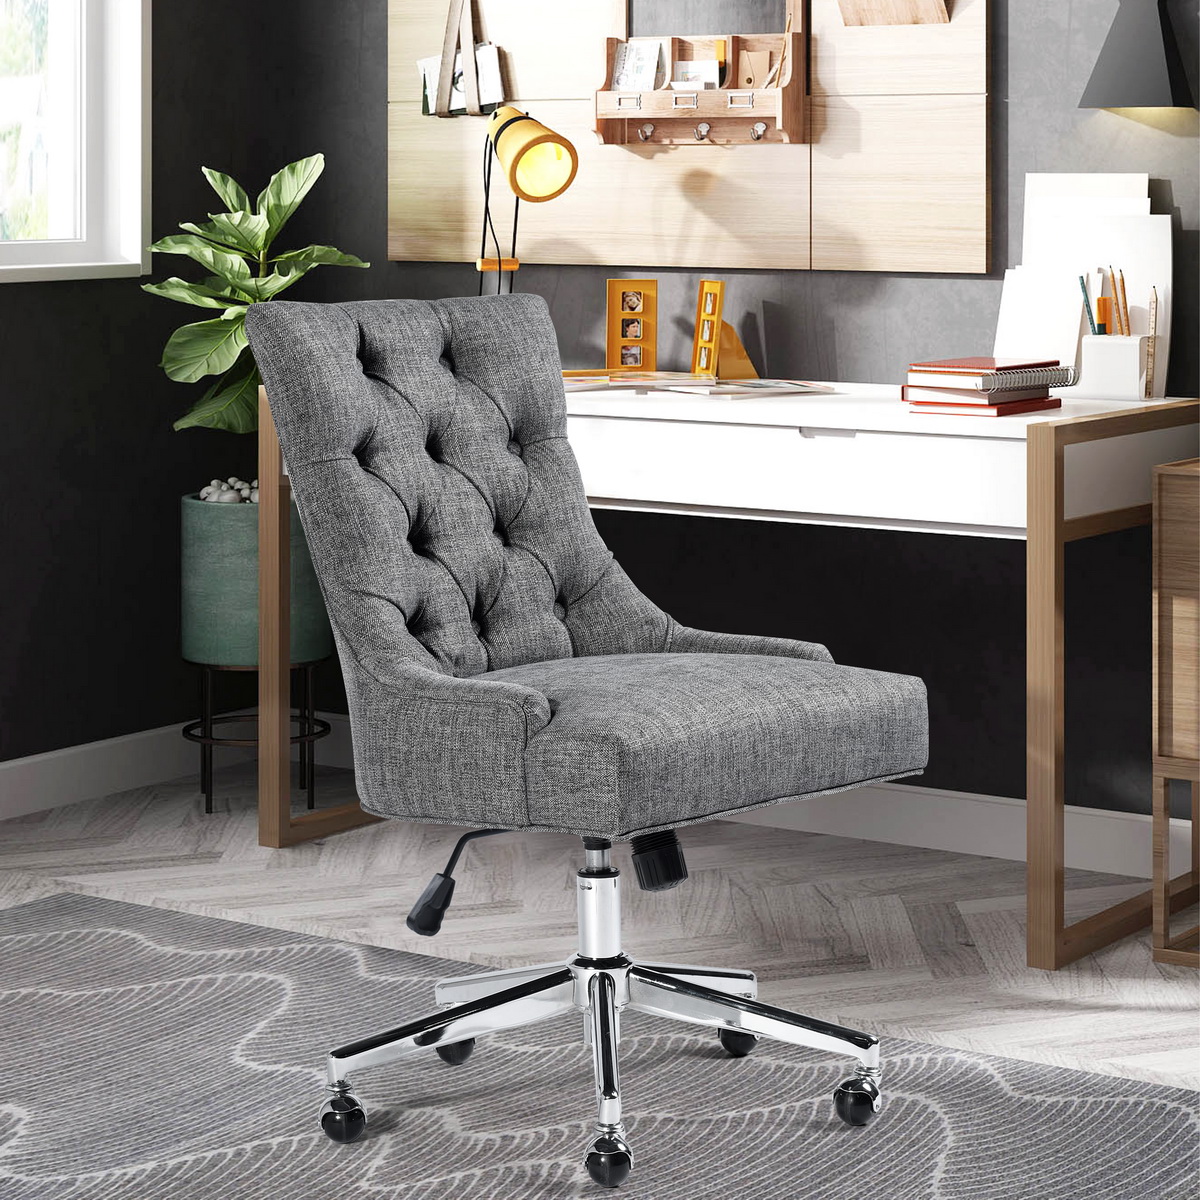 Adjustable Fabric Middle Office Chair Task Chair Tufted Design-Boyel Living